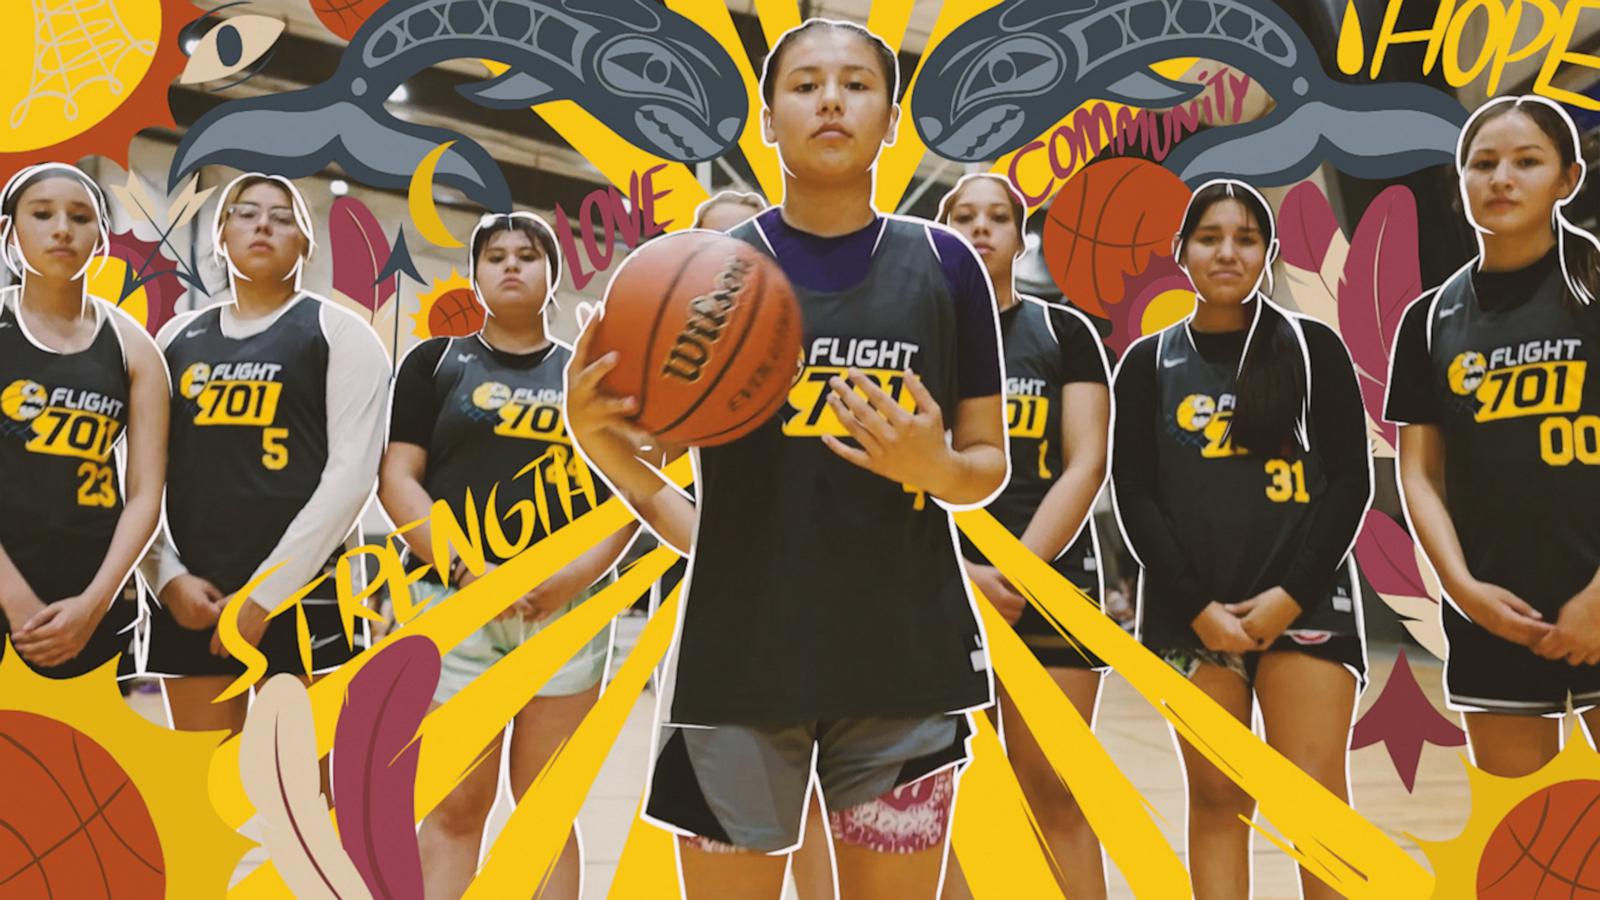 VIDEO: Indigenous basketball league harnesses Native talent, gives hope to community